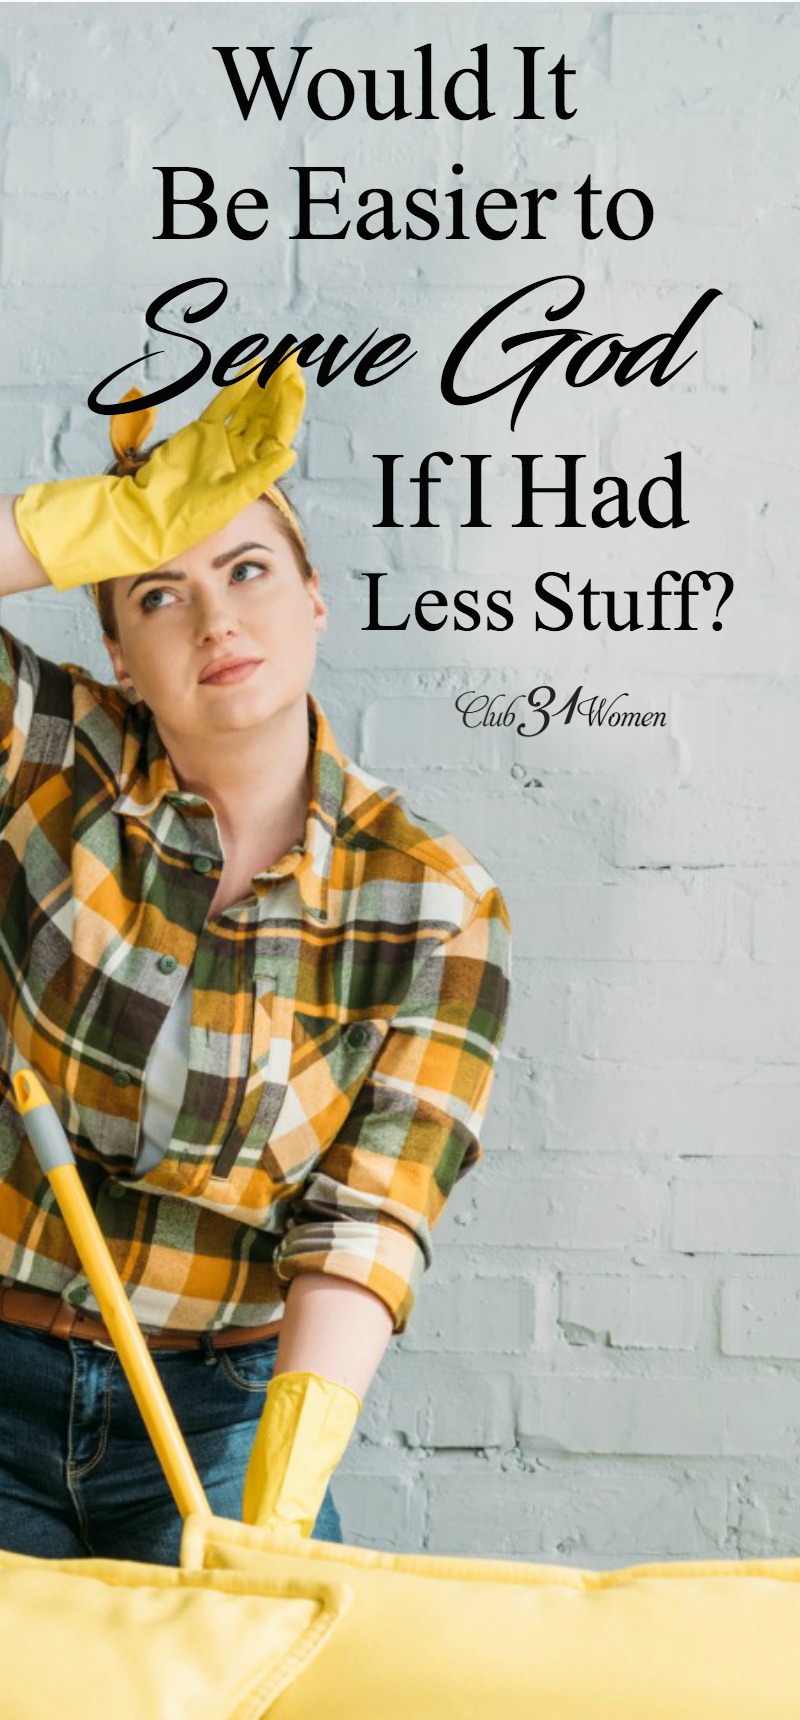 Having less stuff not only frees our home of clutter but also frees our heart. How much time would we save by having less stuff and more time to serve God? via @Club31Women